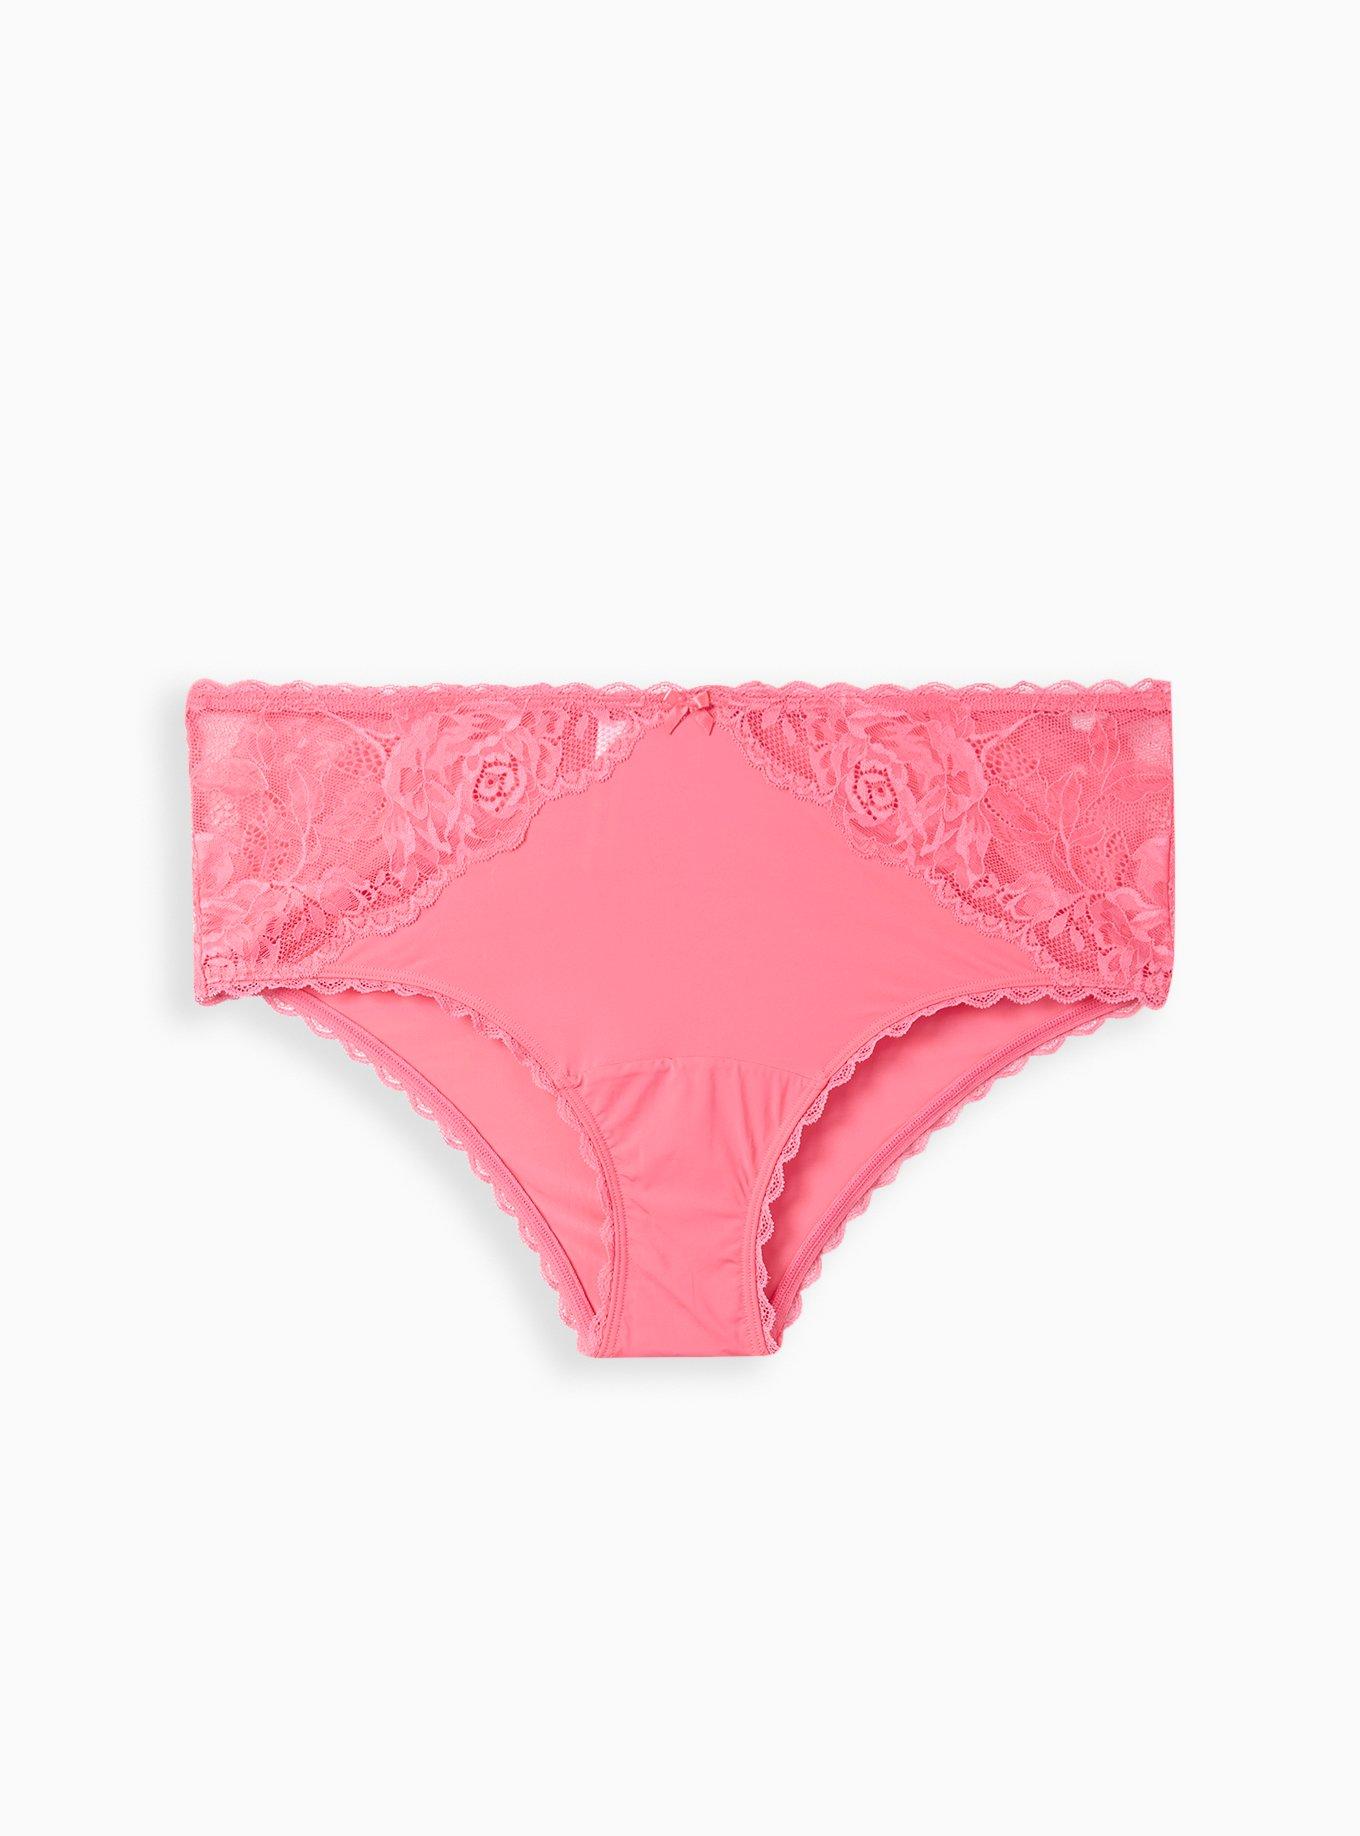 Will you be my valentine white Victoria Secret Cheeky Panty / Get it  personalized for FREE / *FAST SHIPPING*